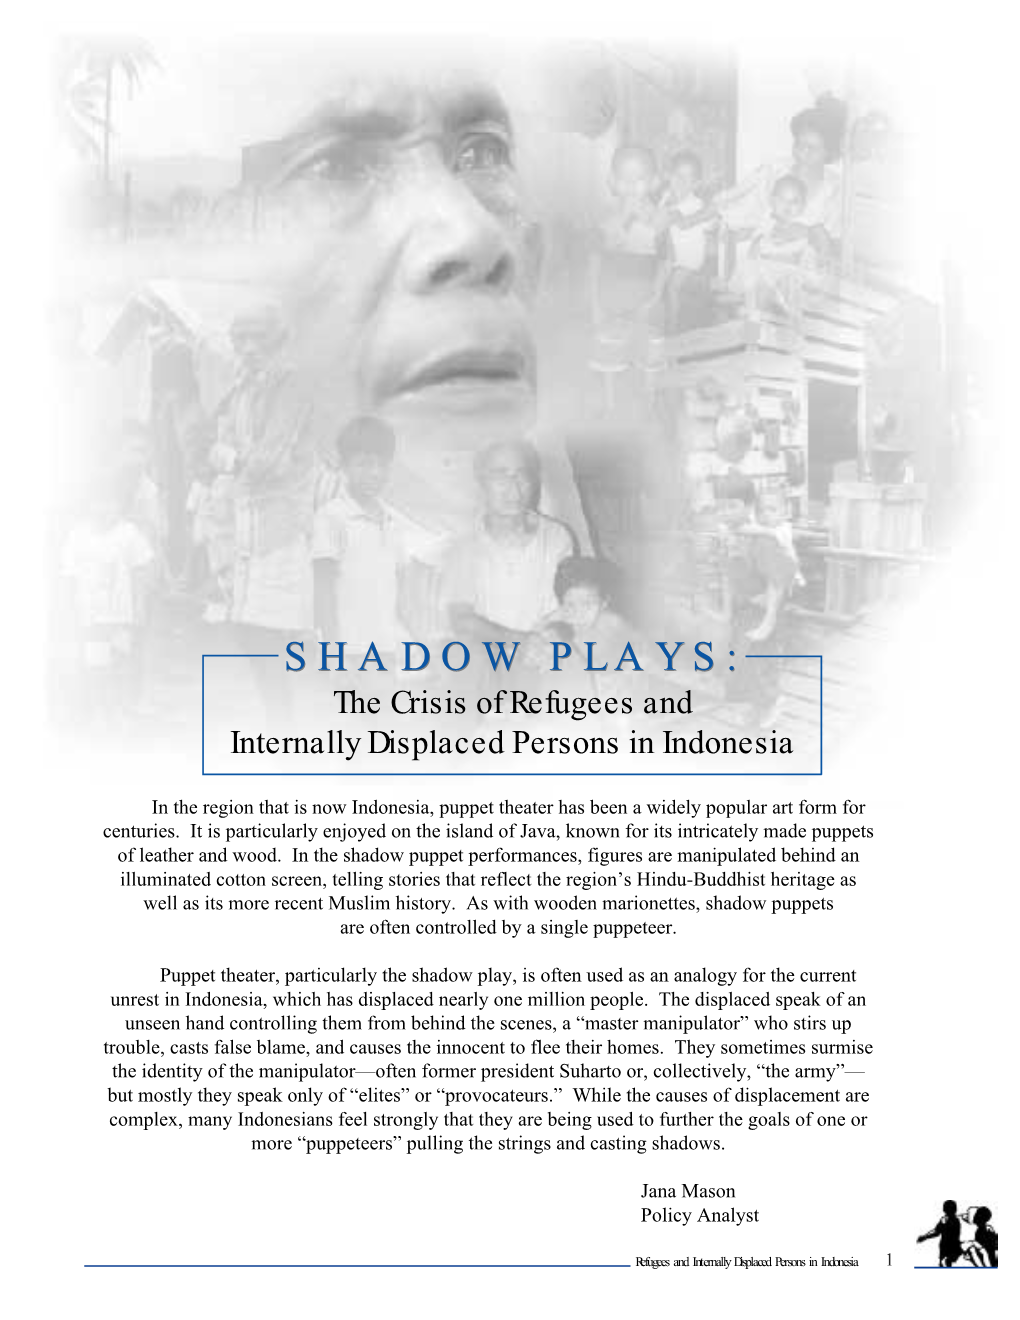 SHADOW PLAYS: the Crisis of Refugees and Internally Displaced Persons in Indonesia